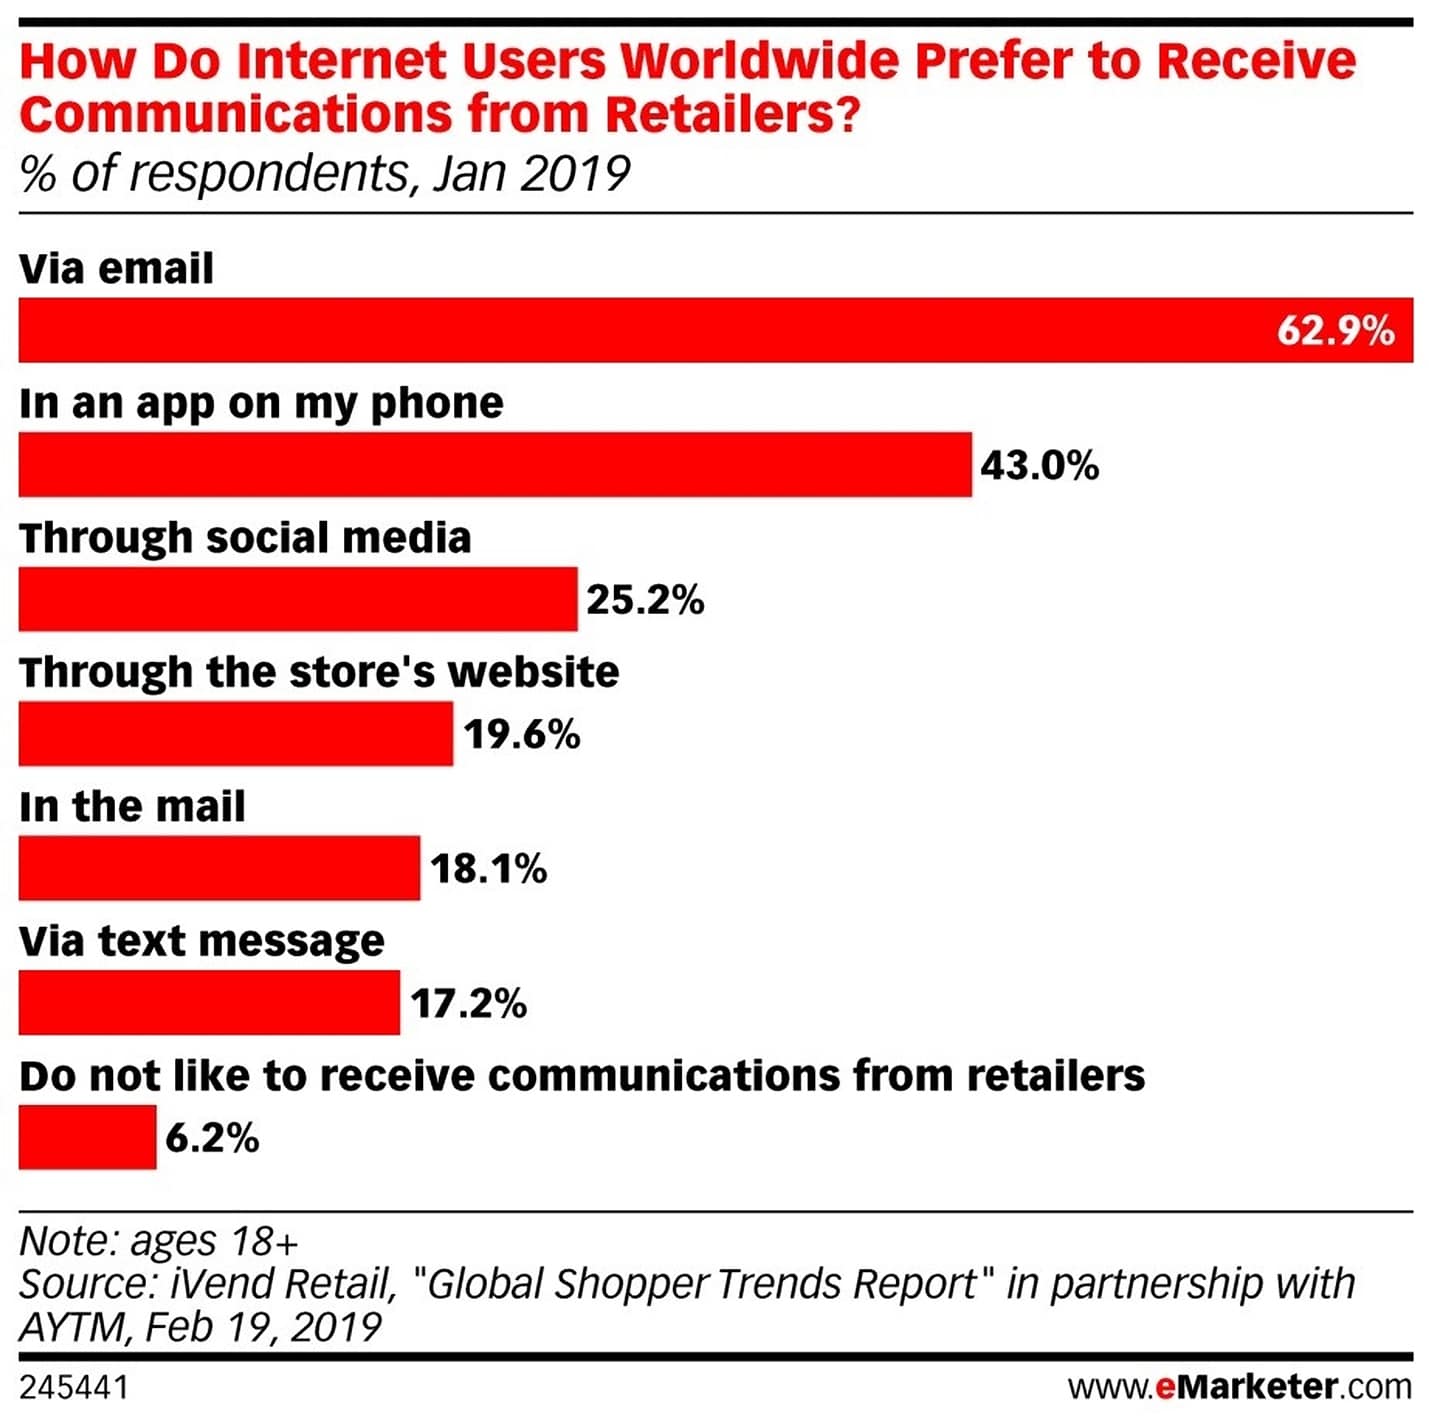 How internet users prefer to receive communications from retailers